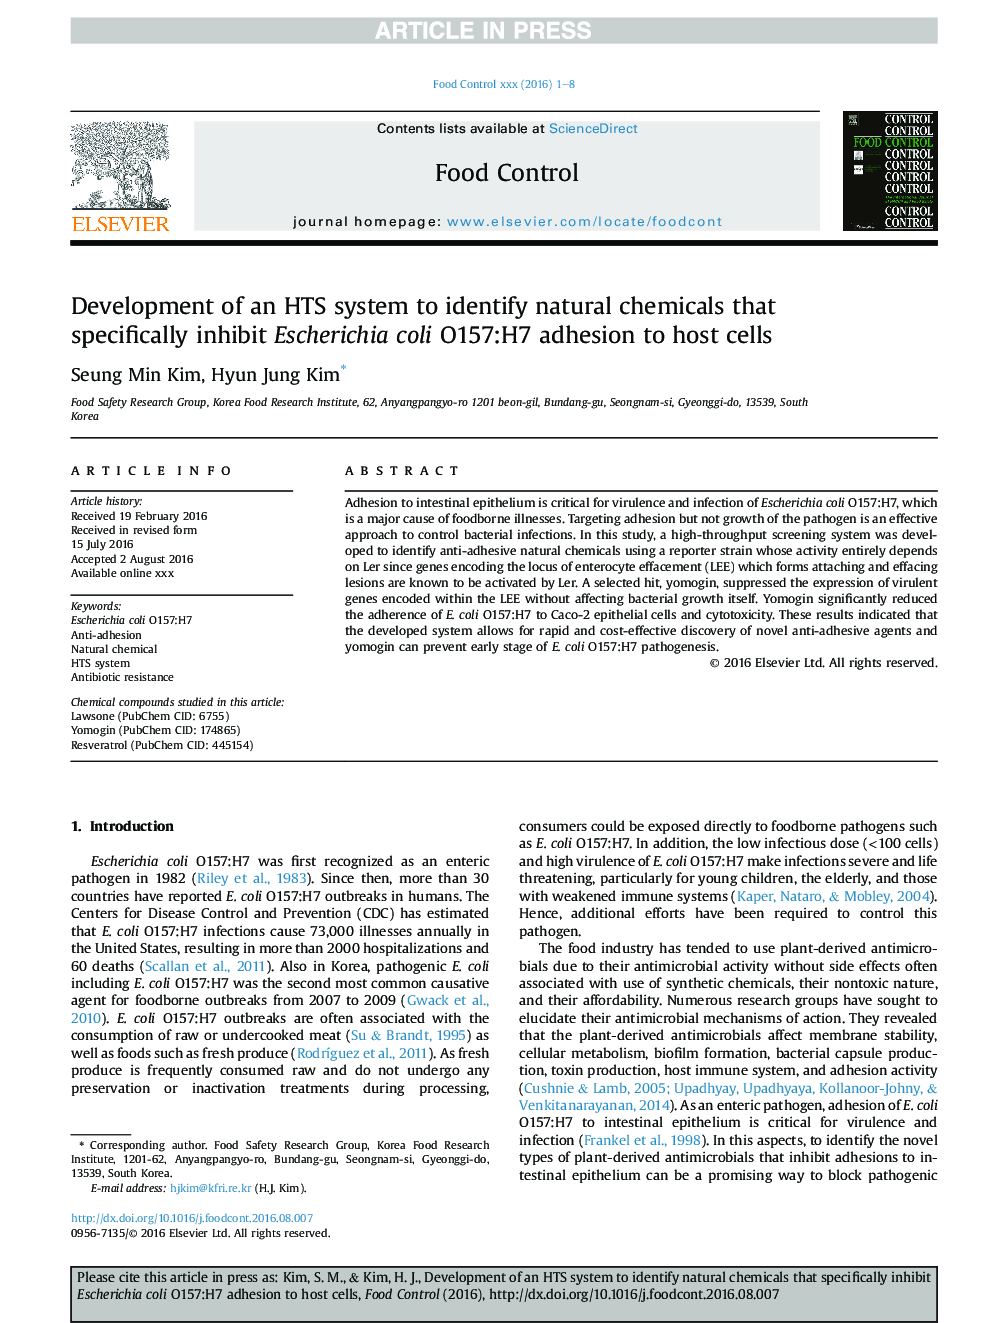 Development of an HTS system to identify natural chemicals that specifically inhibit Escherichia coli O157:H7 adhesion to host cells